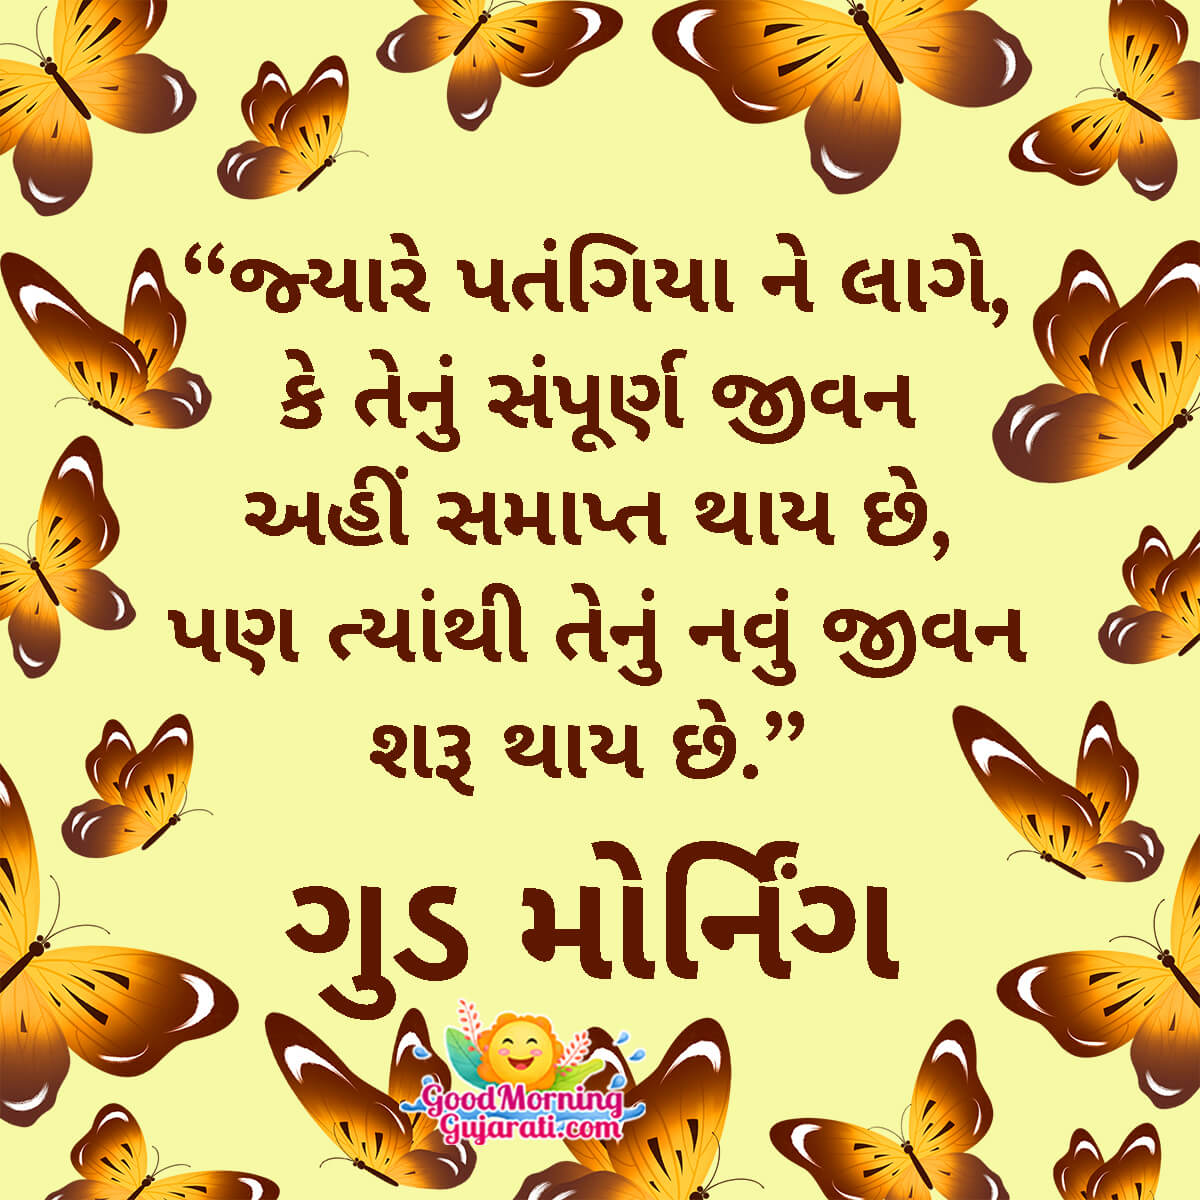 Good Morning Butterfly Quote Gujarati Image